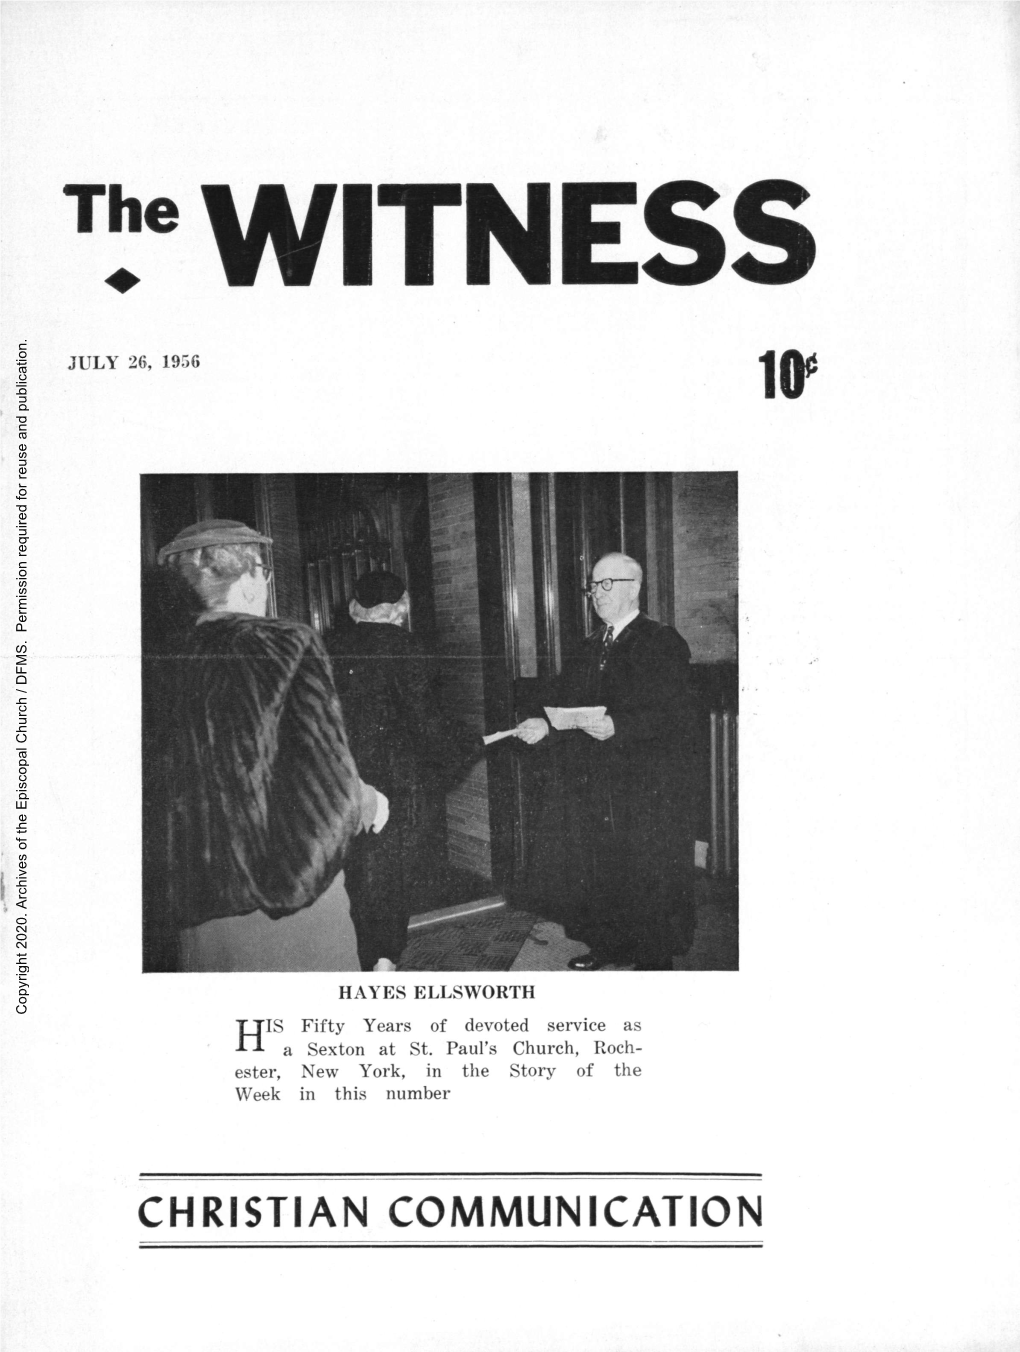 1956 the Witness, Vol. 43, No. 24